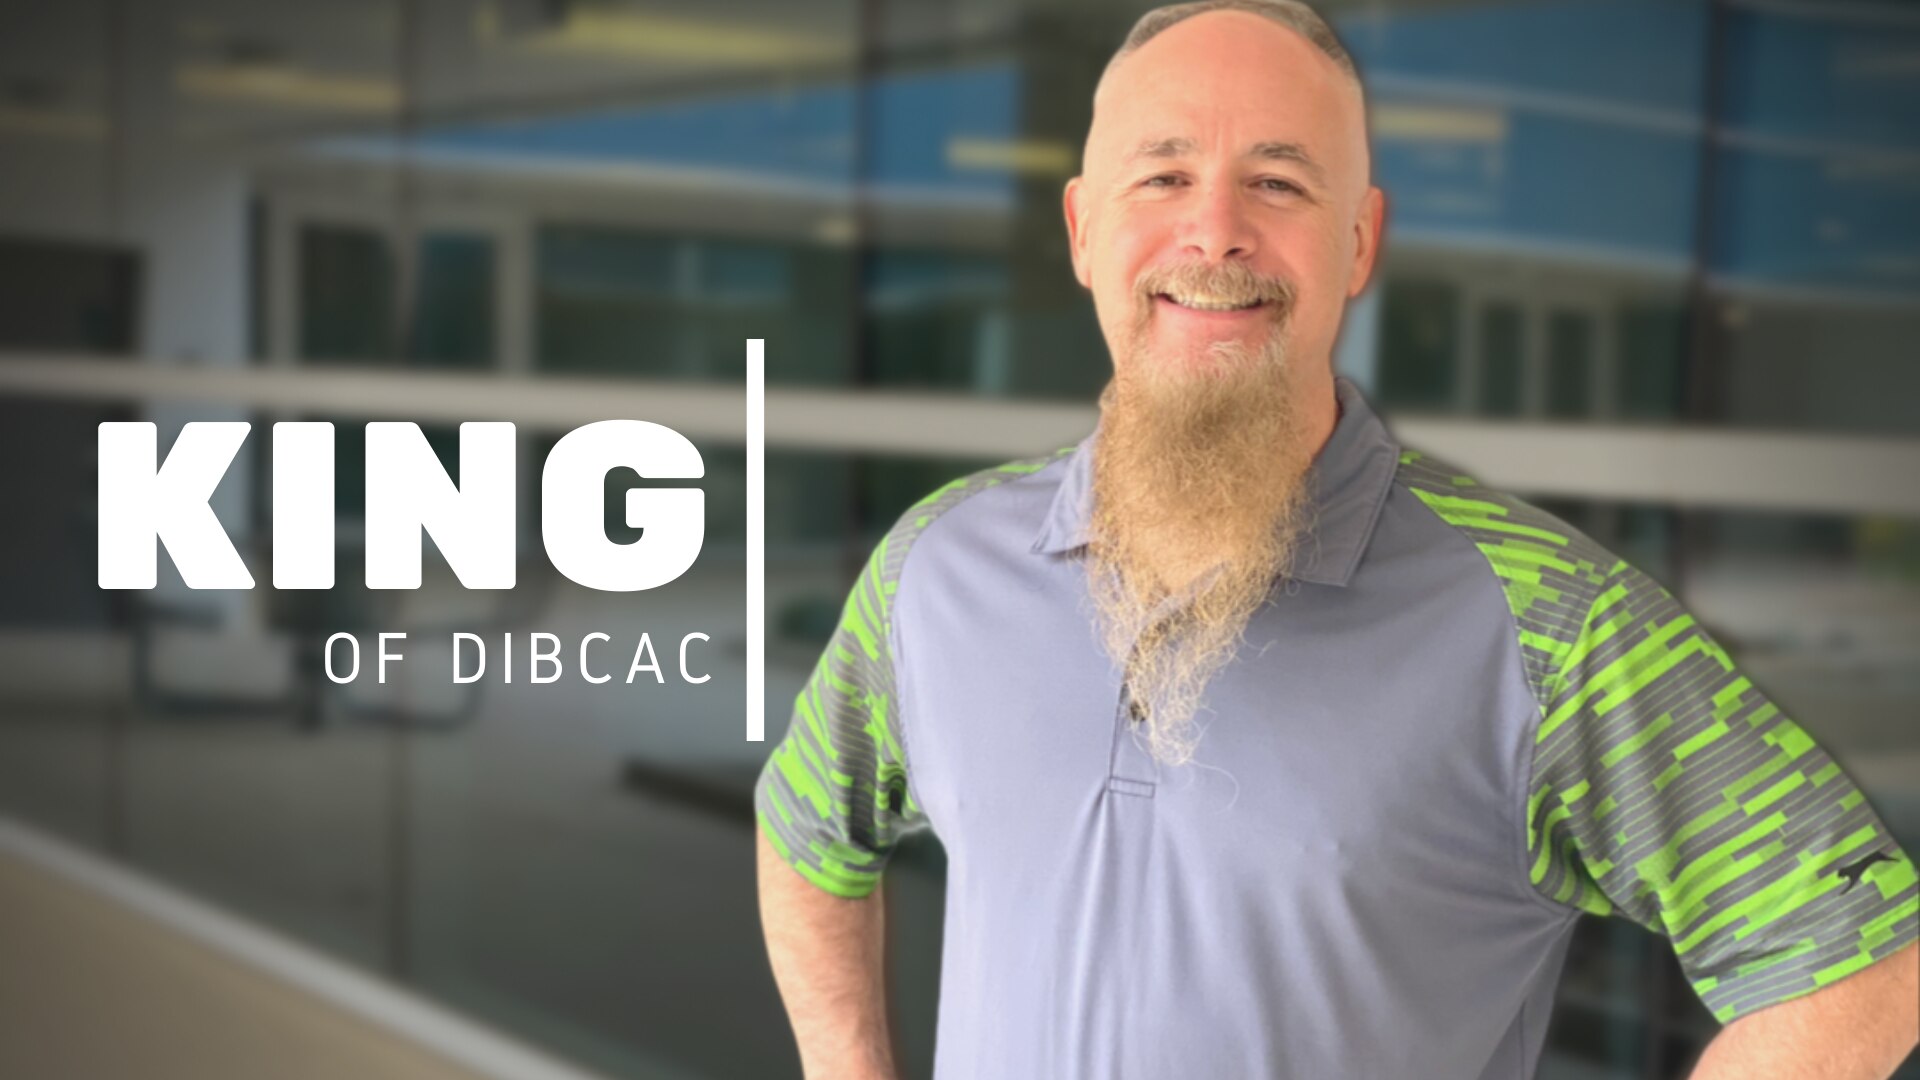 Man poses for photo with text reading "King of DIBCAC"